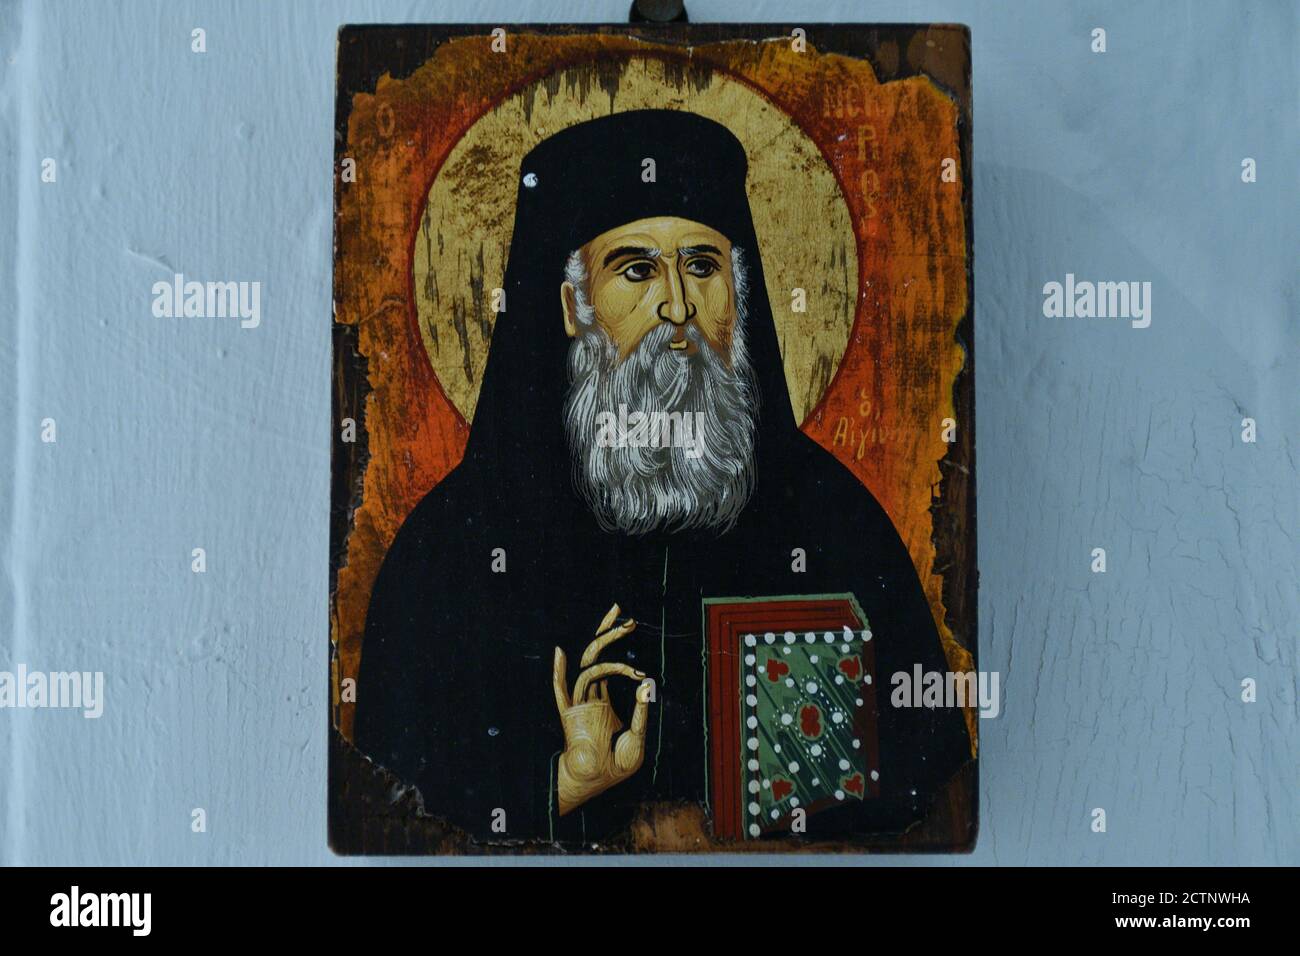 An orthodox icon painted on wood Stock Photo